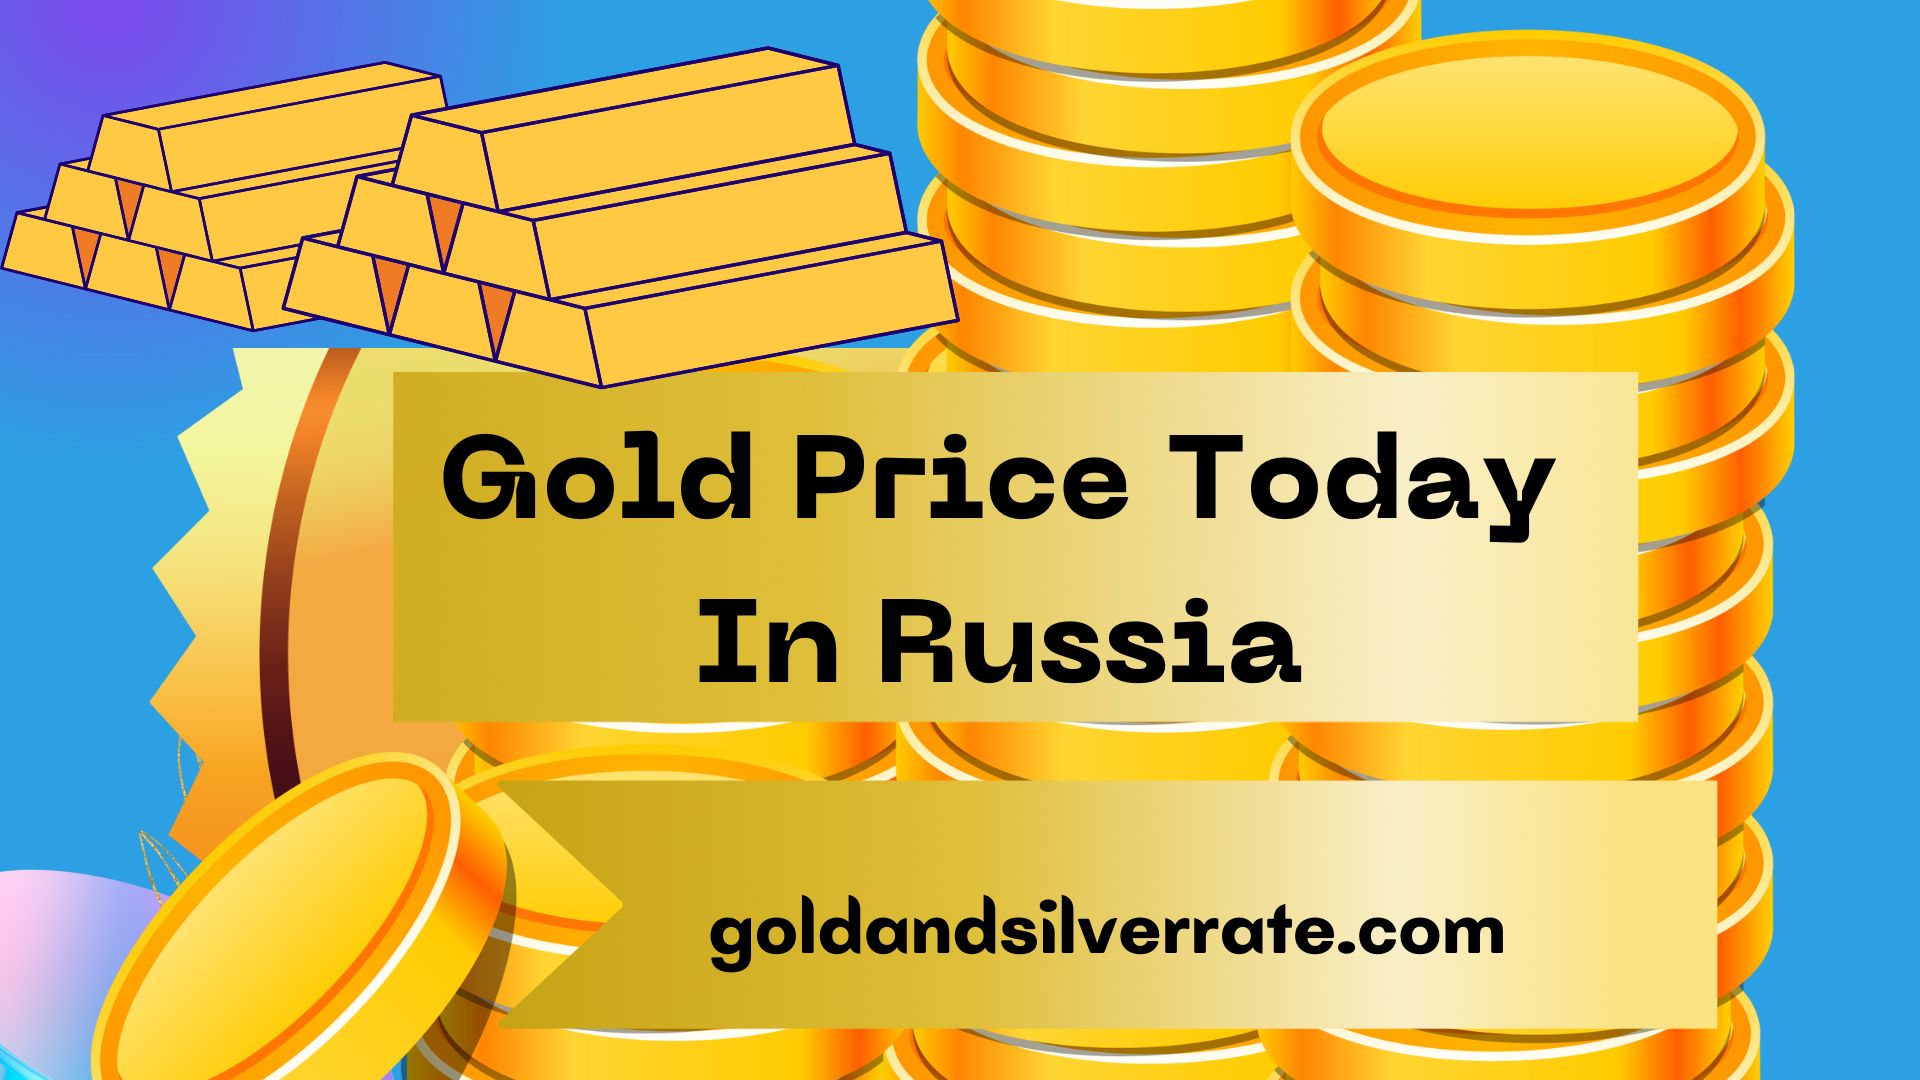 GOLD PRICE TODAY IN RUSSIA